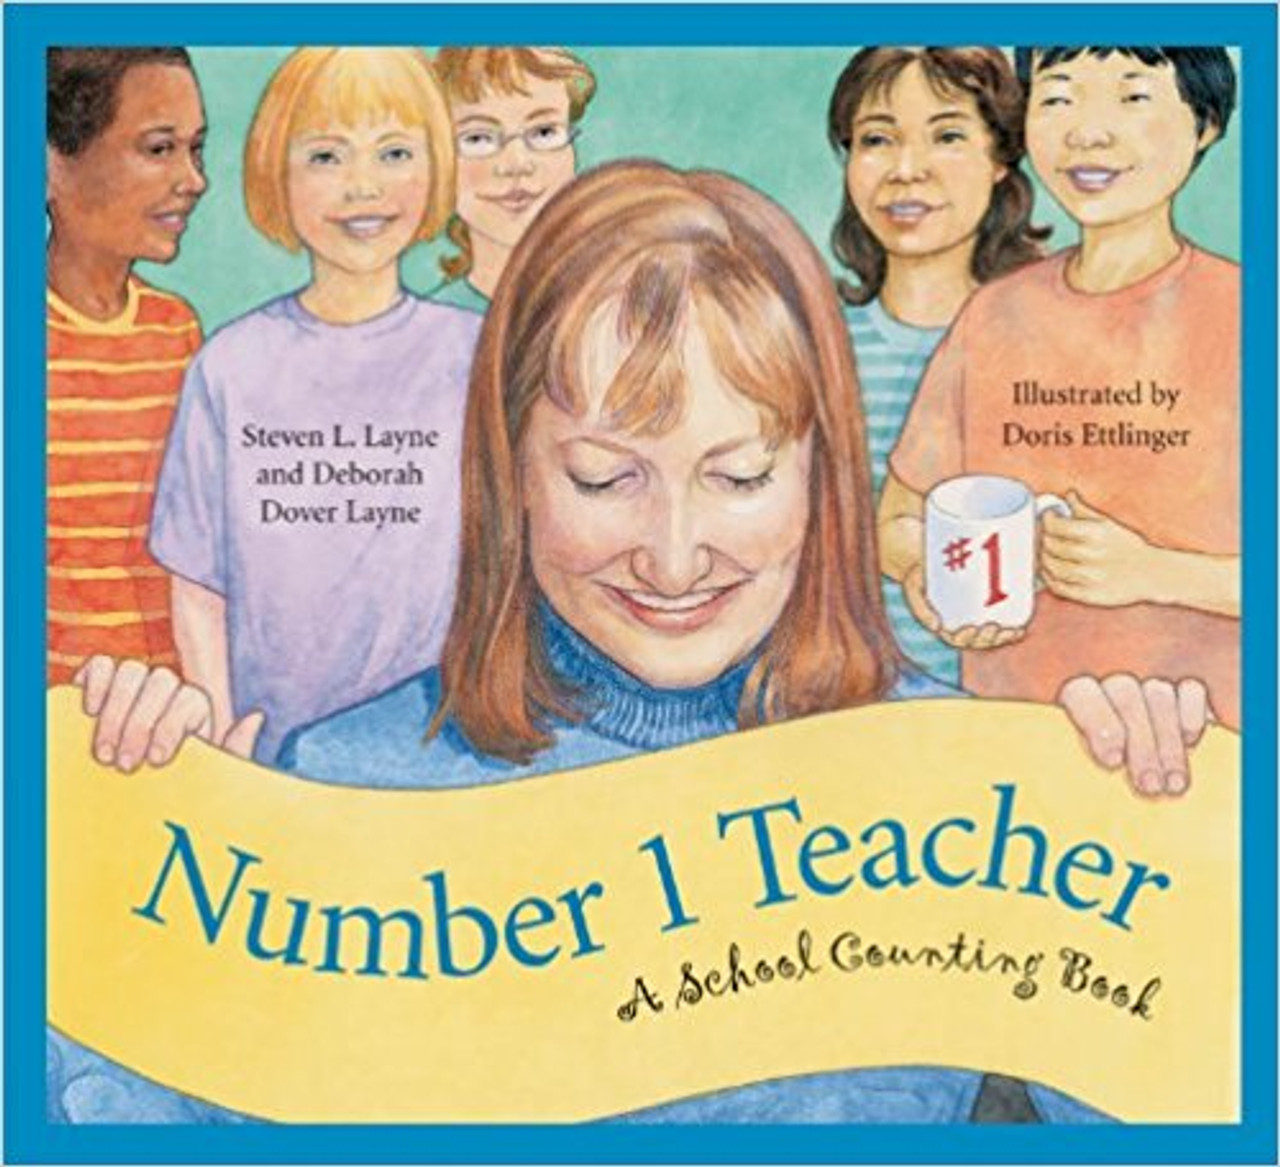 Number 1 Teacher: A School Counting Book by Steven L Layne